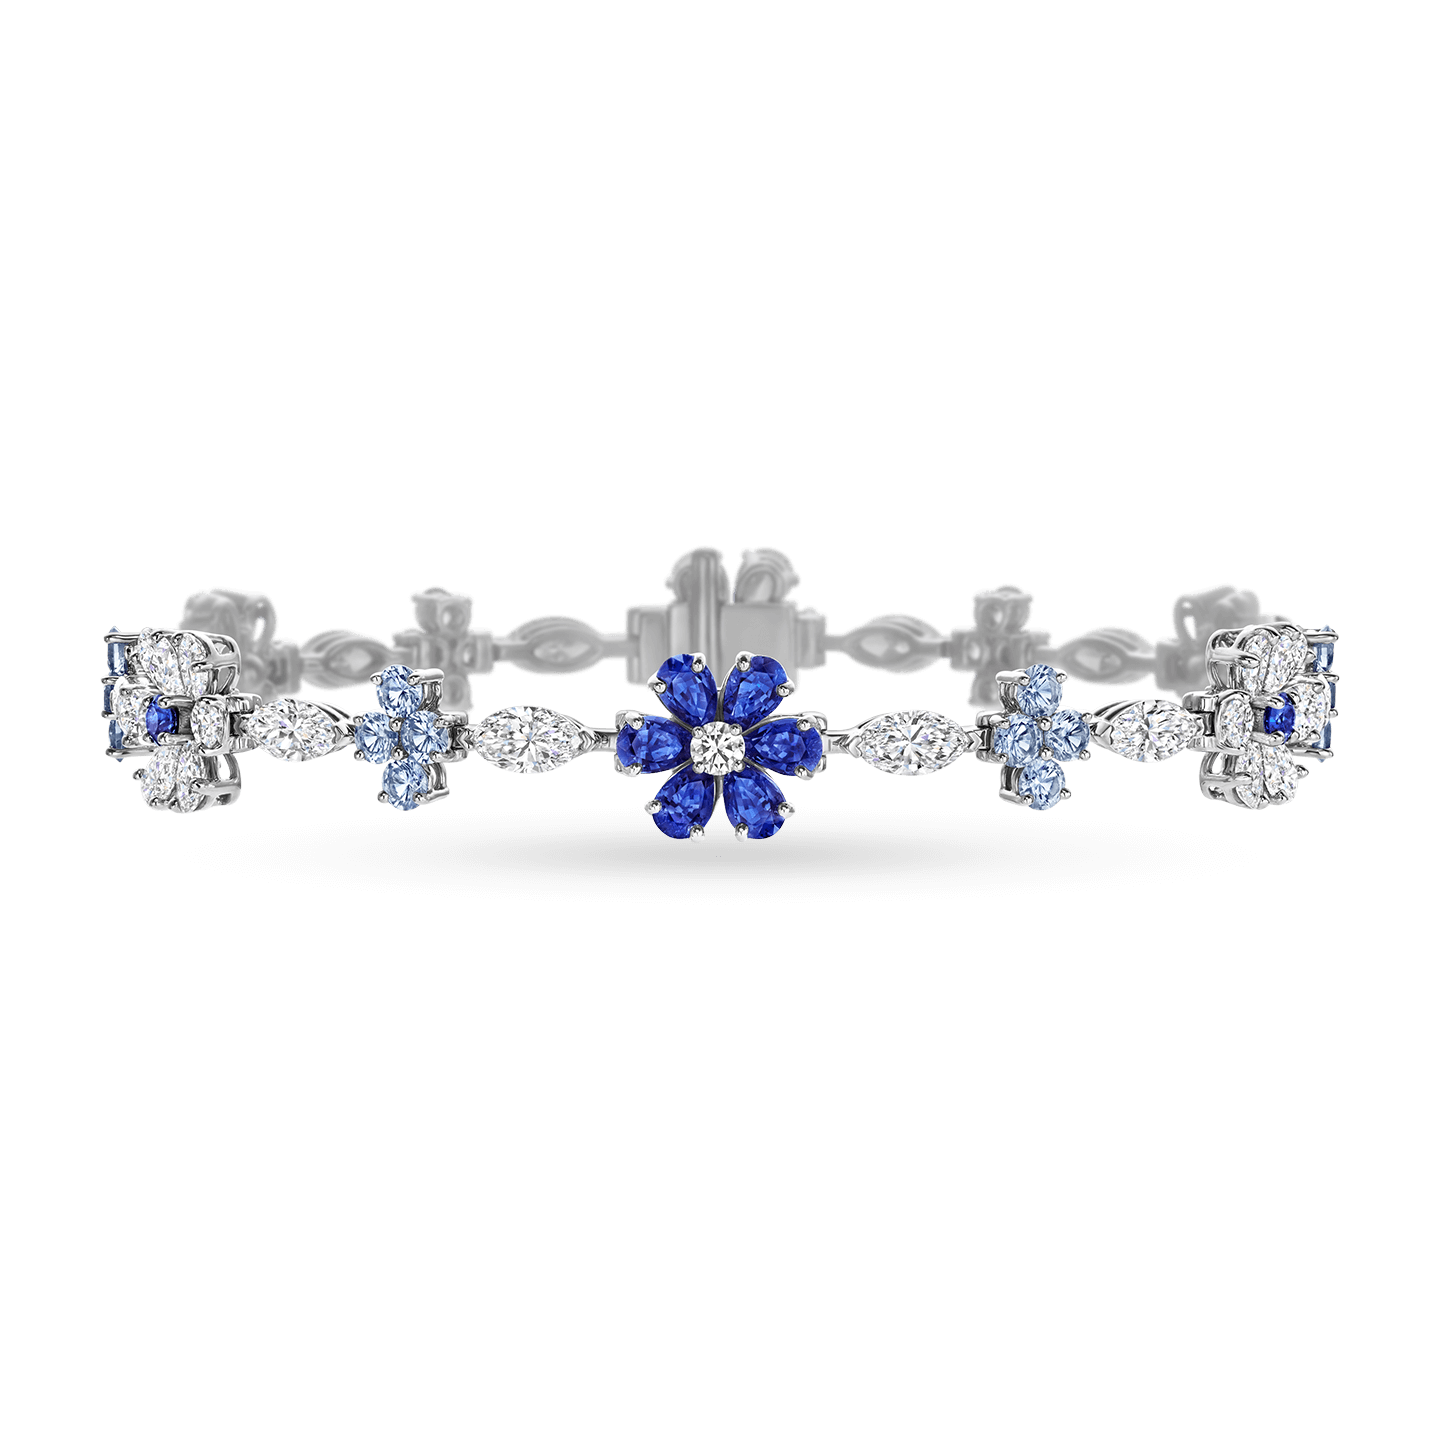 Forget-Me-Not Sapphire and Diamond Bracelet, Product Image 1